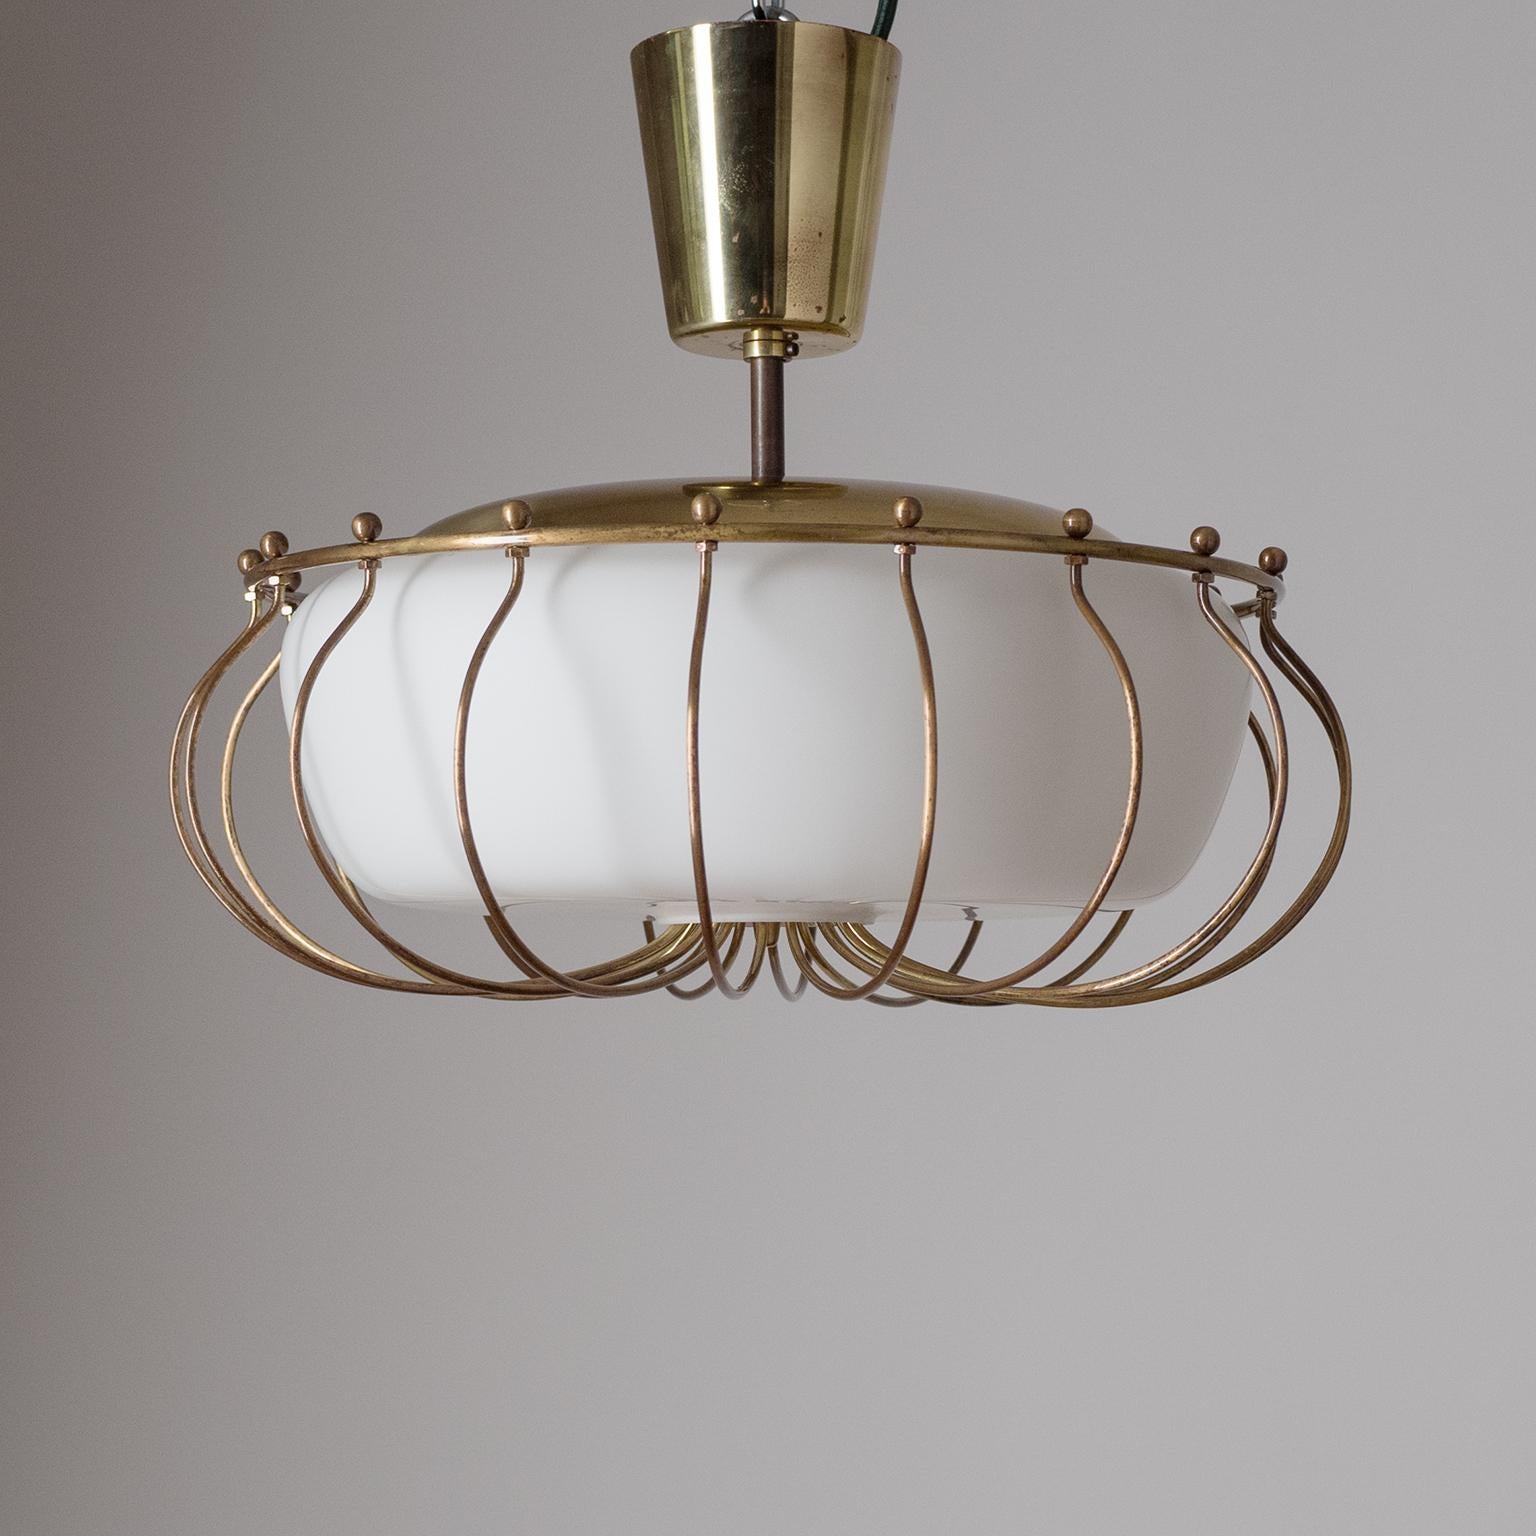 Mid-20th Century Ceiling Light, 1940s, Brass and Satin Glass